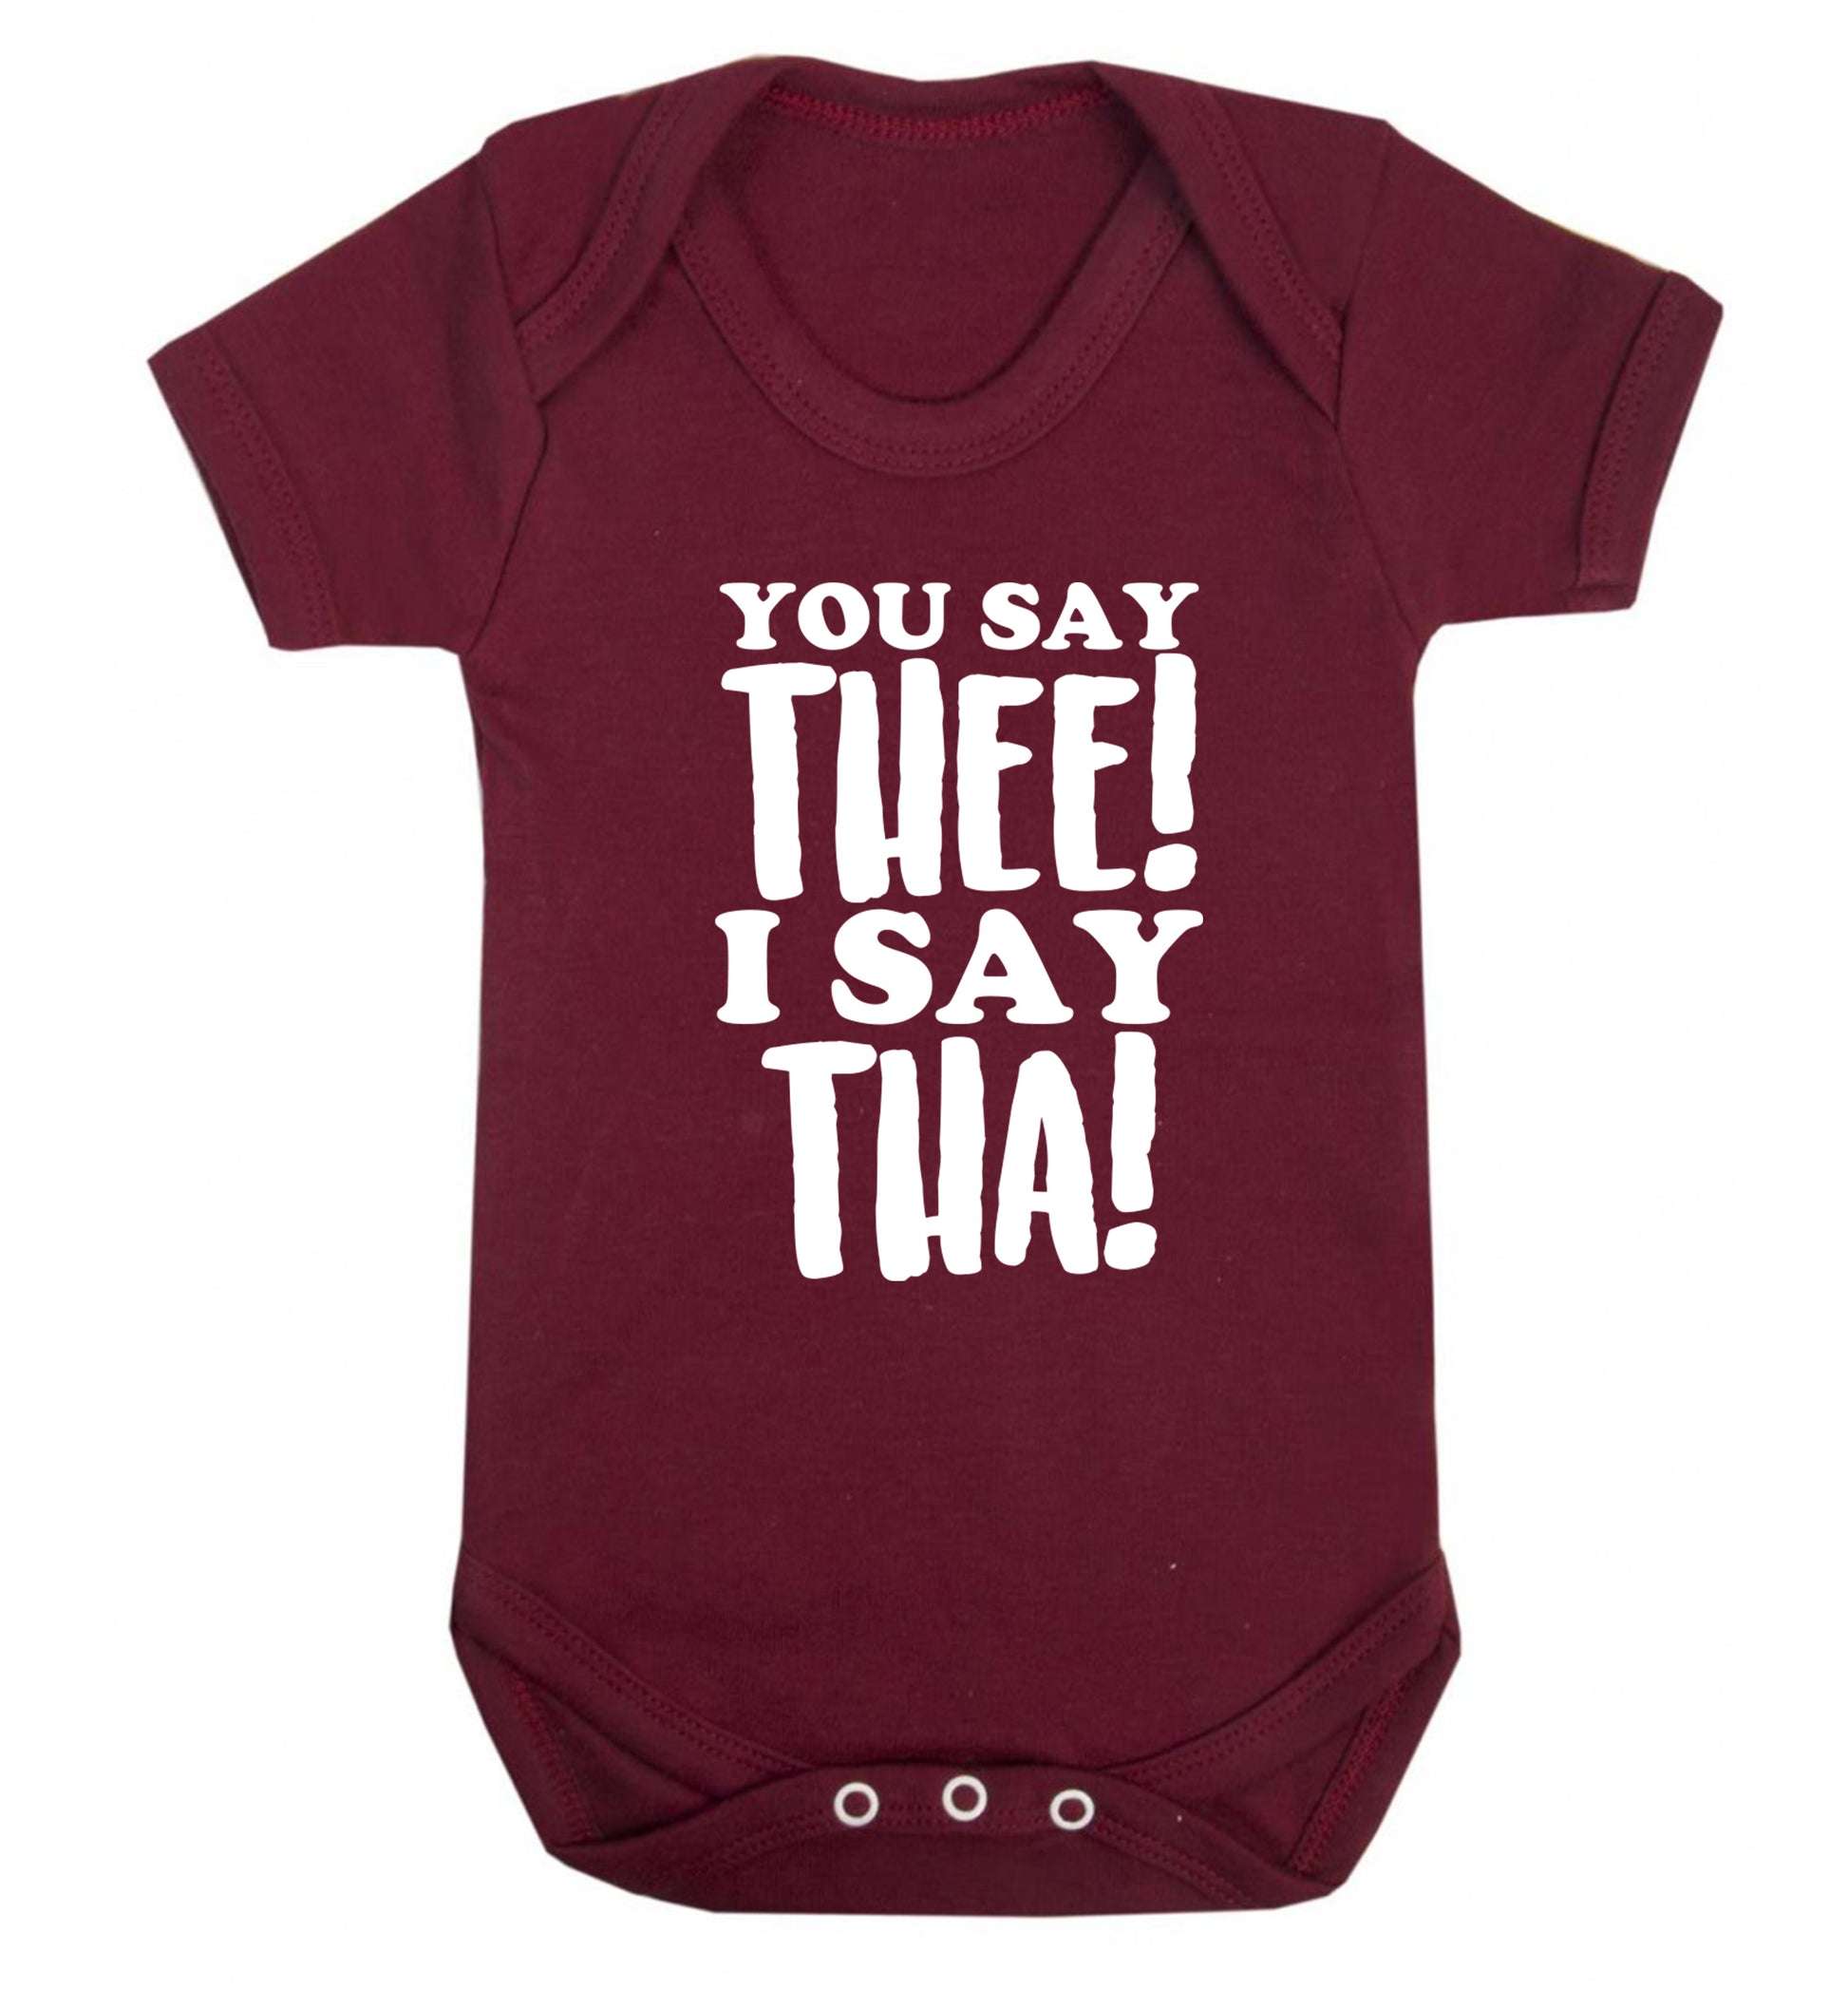 You say thee I say tha Baby Vest maroon 18-24 months